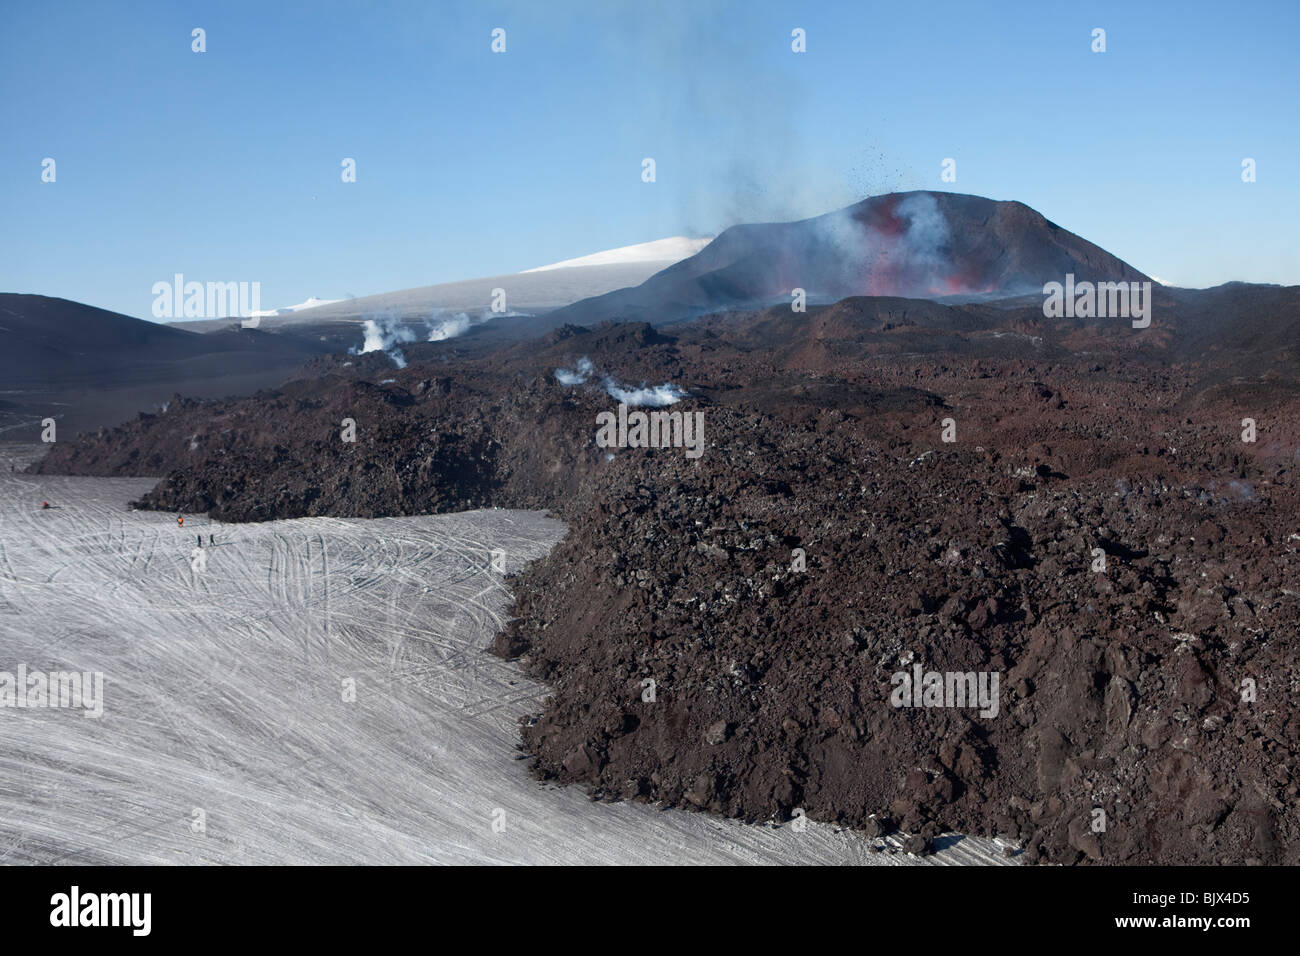 New lava from the volcanic eruption at Fimmvorduhals, in Eyjafjallajokull, Iceland Stock Photo